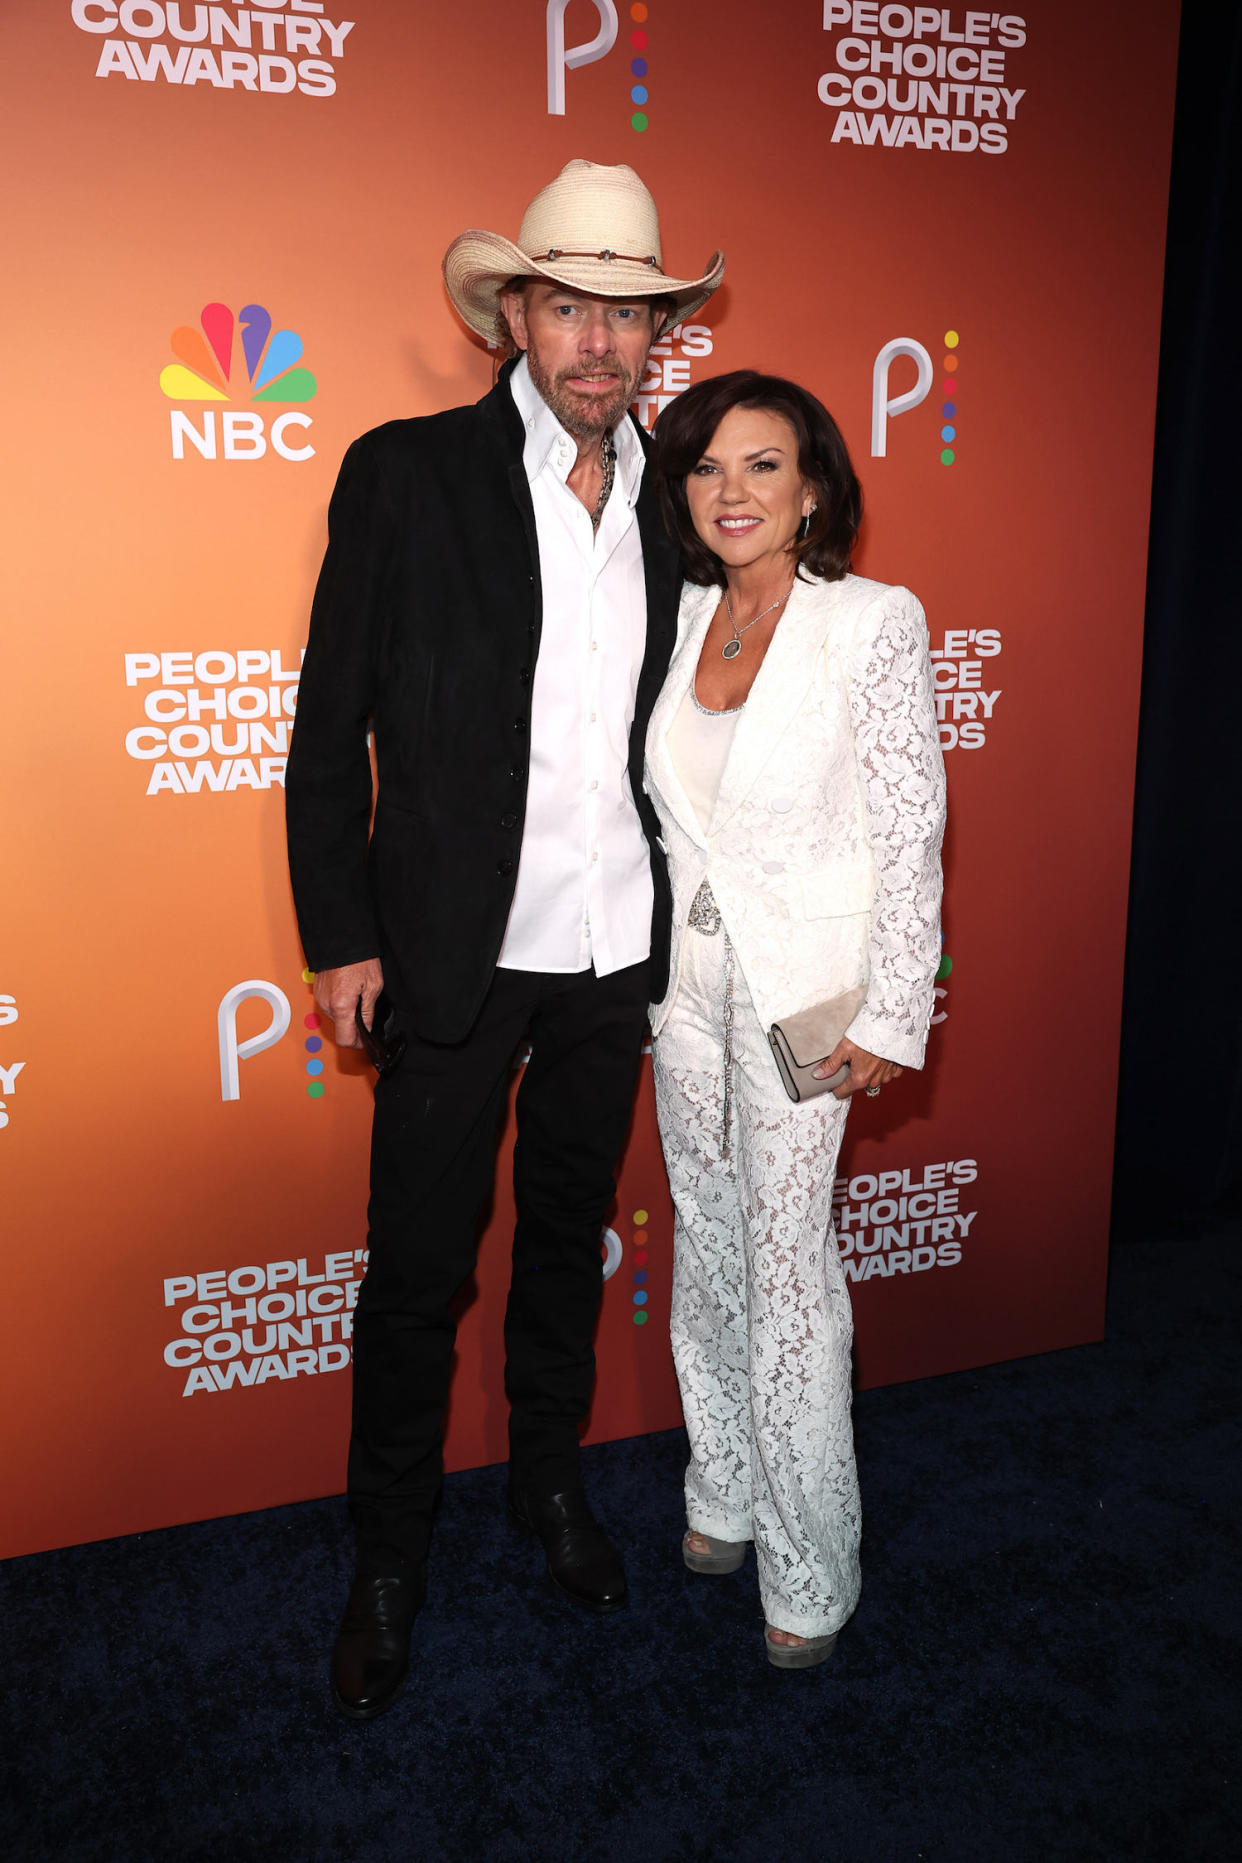 Toby Keith and Tricia Lucus posed together at the 2023 People's Choice Country Awards. (Terry Wyatt / Getty Images)